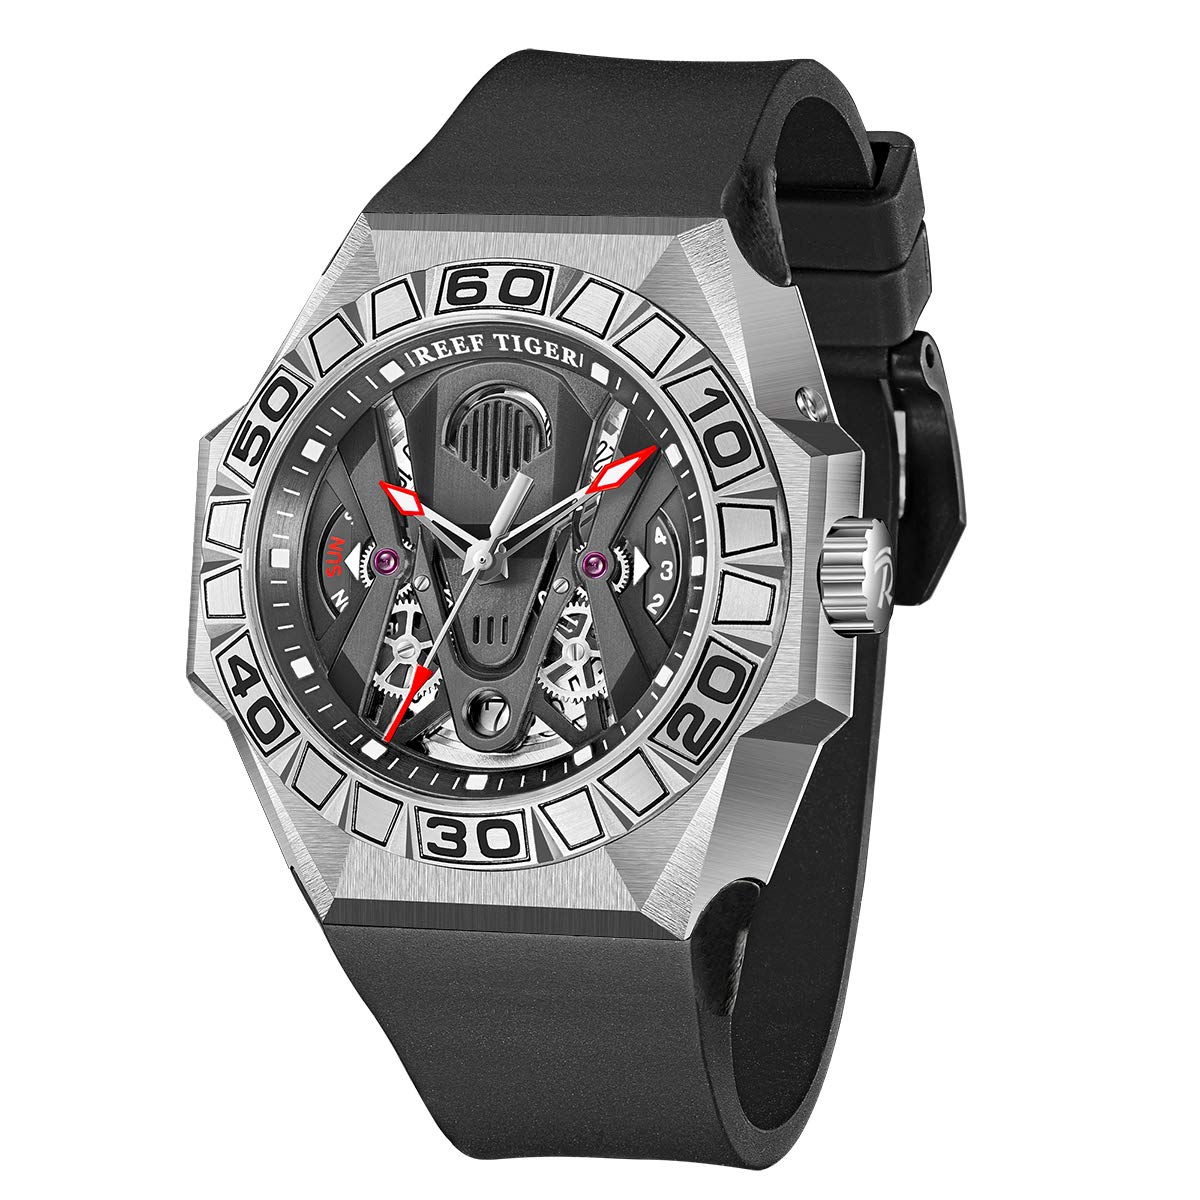 REEF TIGER Men Sport Automatic Watches Mechanical Skeleton Watch Rose Gold Waterproof Rubber Strap RGA6912